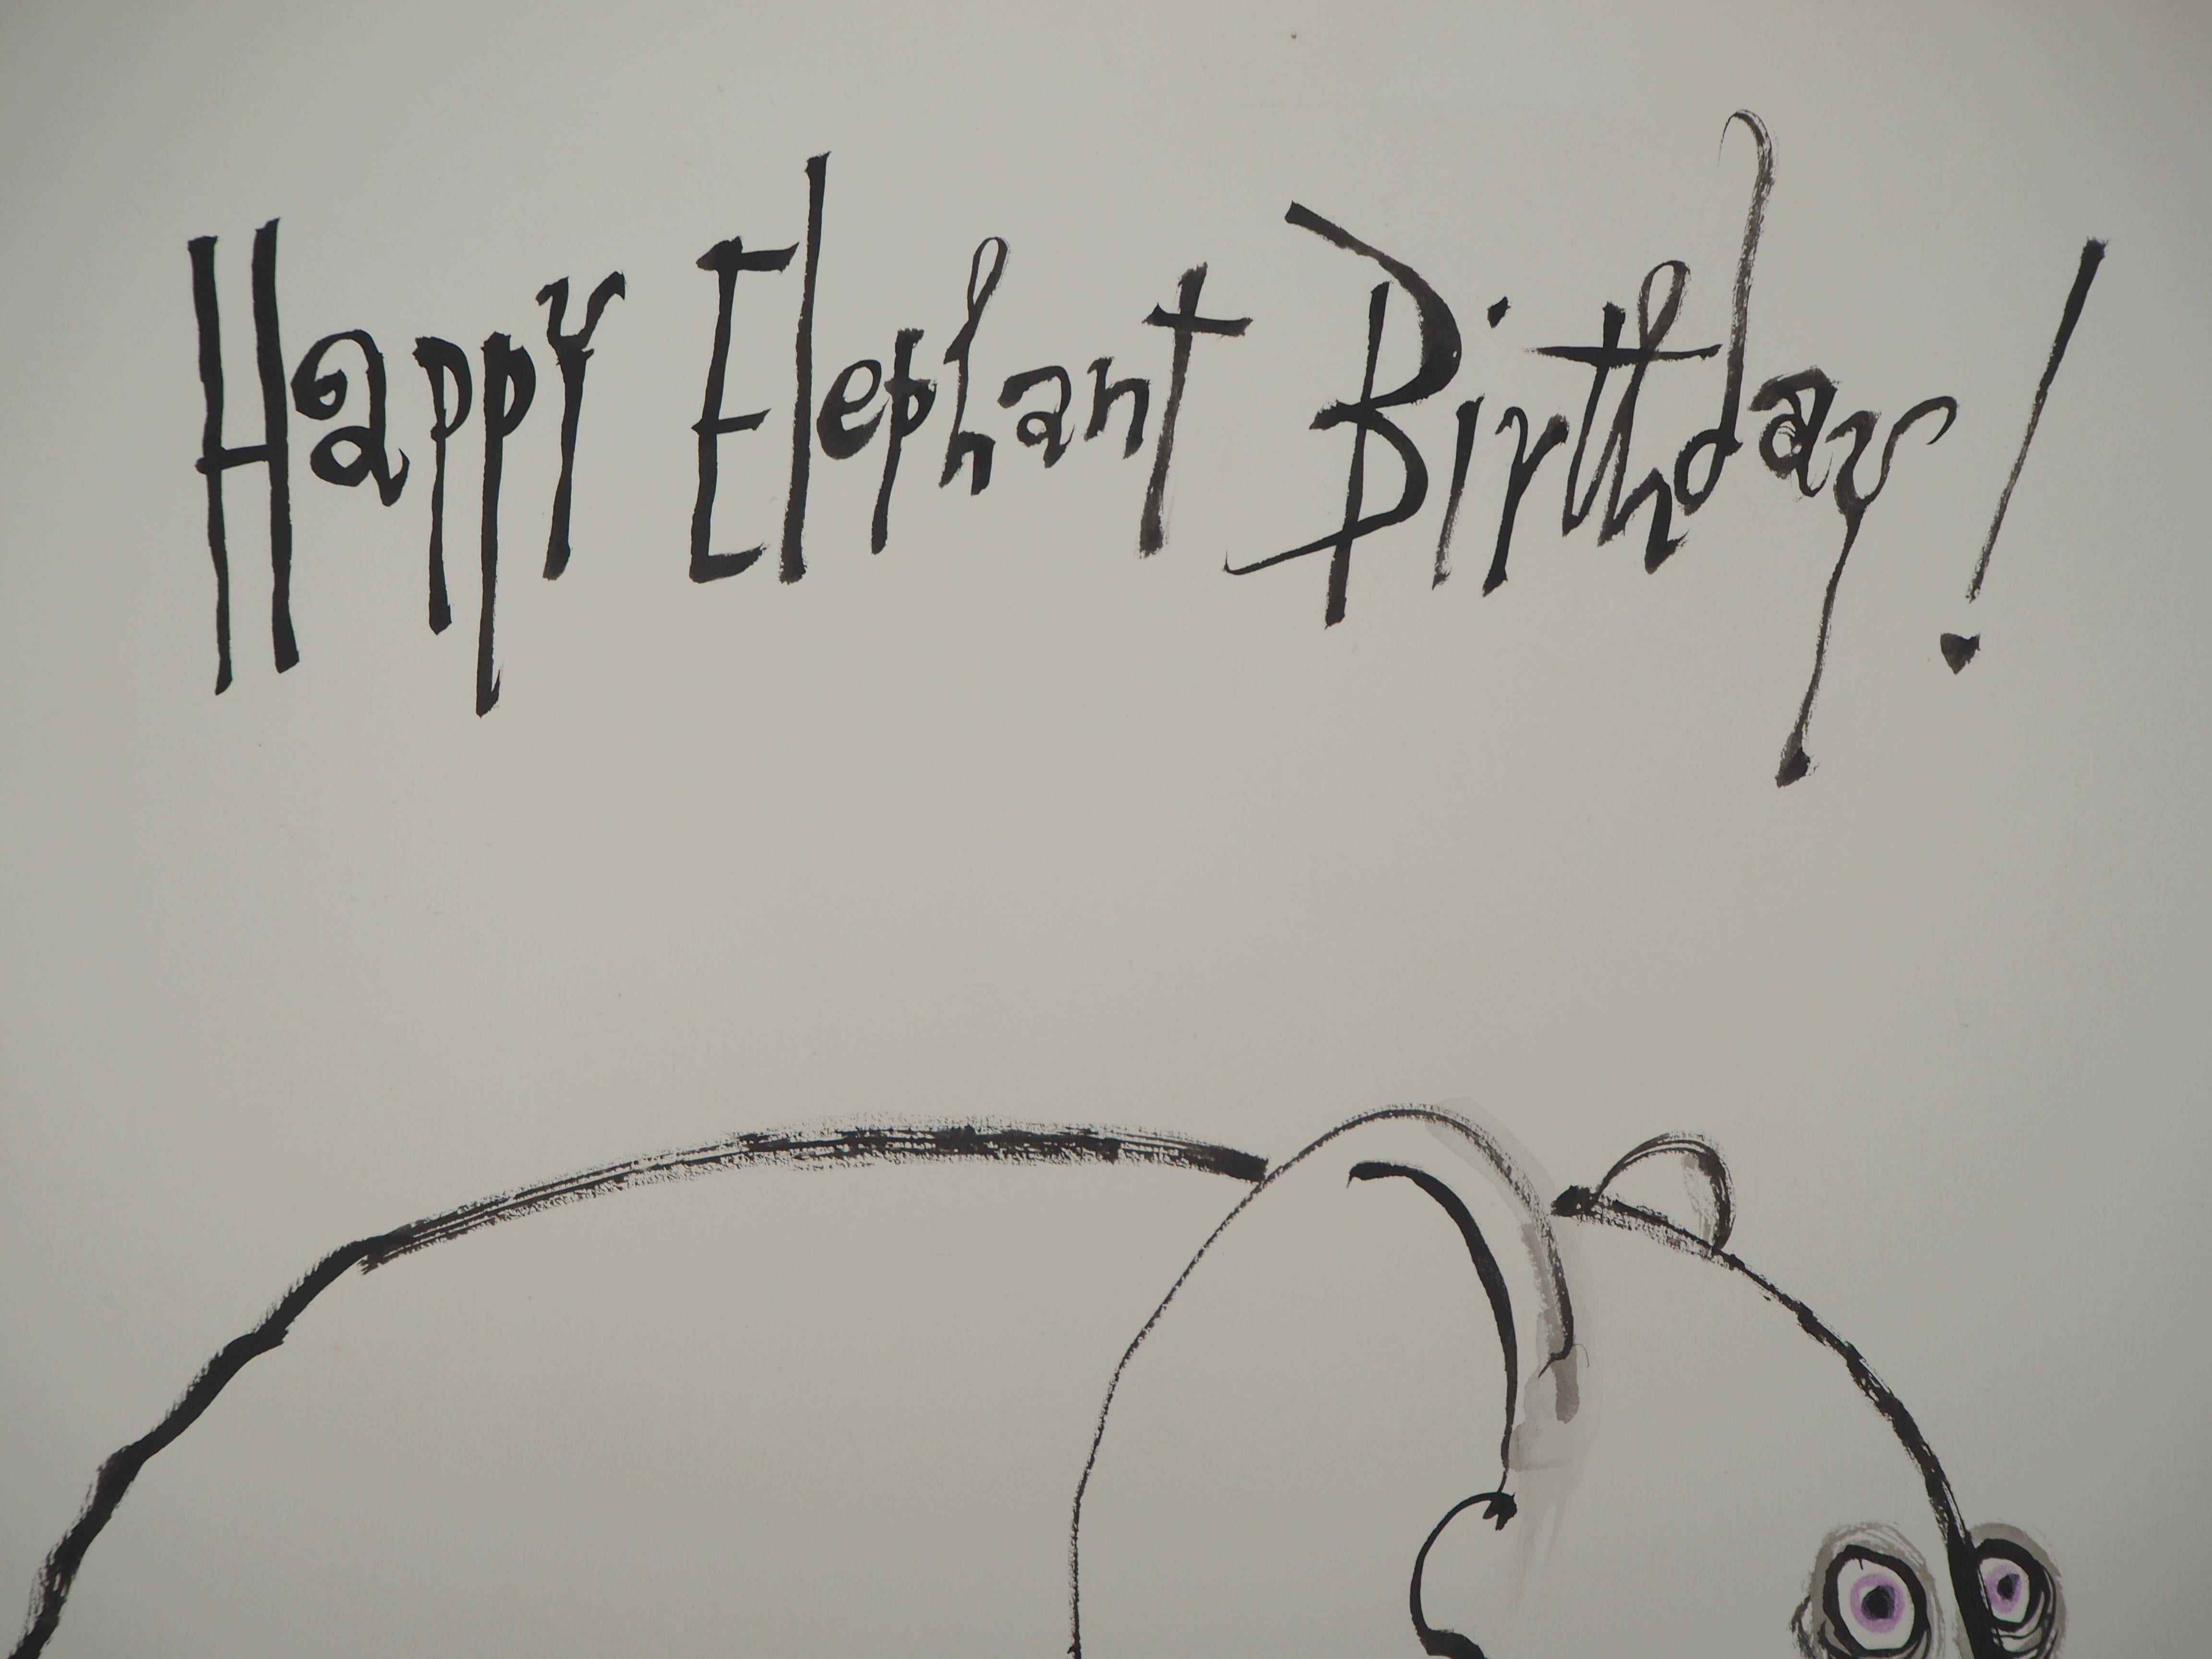 Happy Elephant Birthday - Original ink drawing, Signed - Modern Art by Ronald Searle